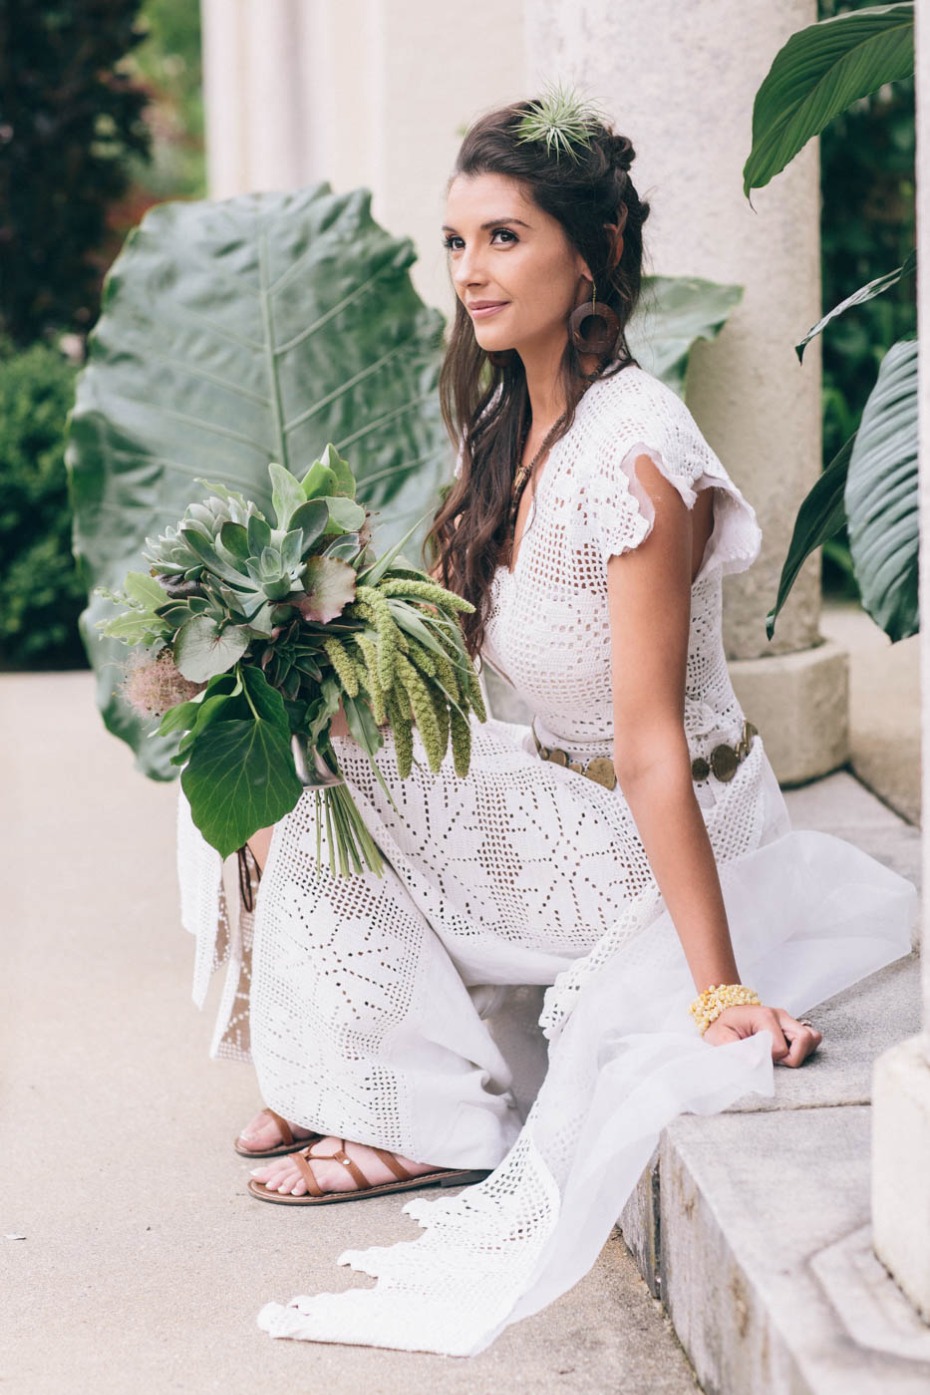 lace and geometric inspired wedding dress